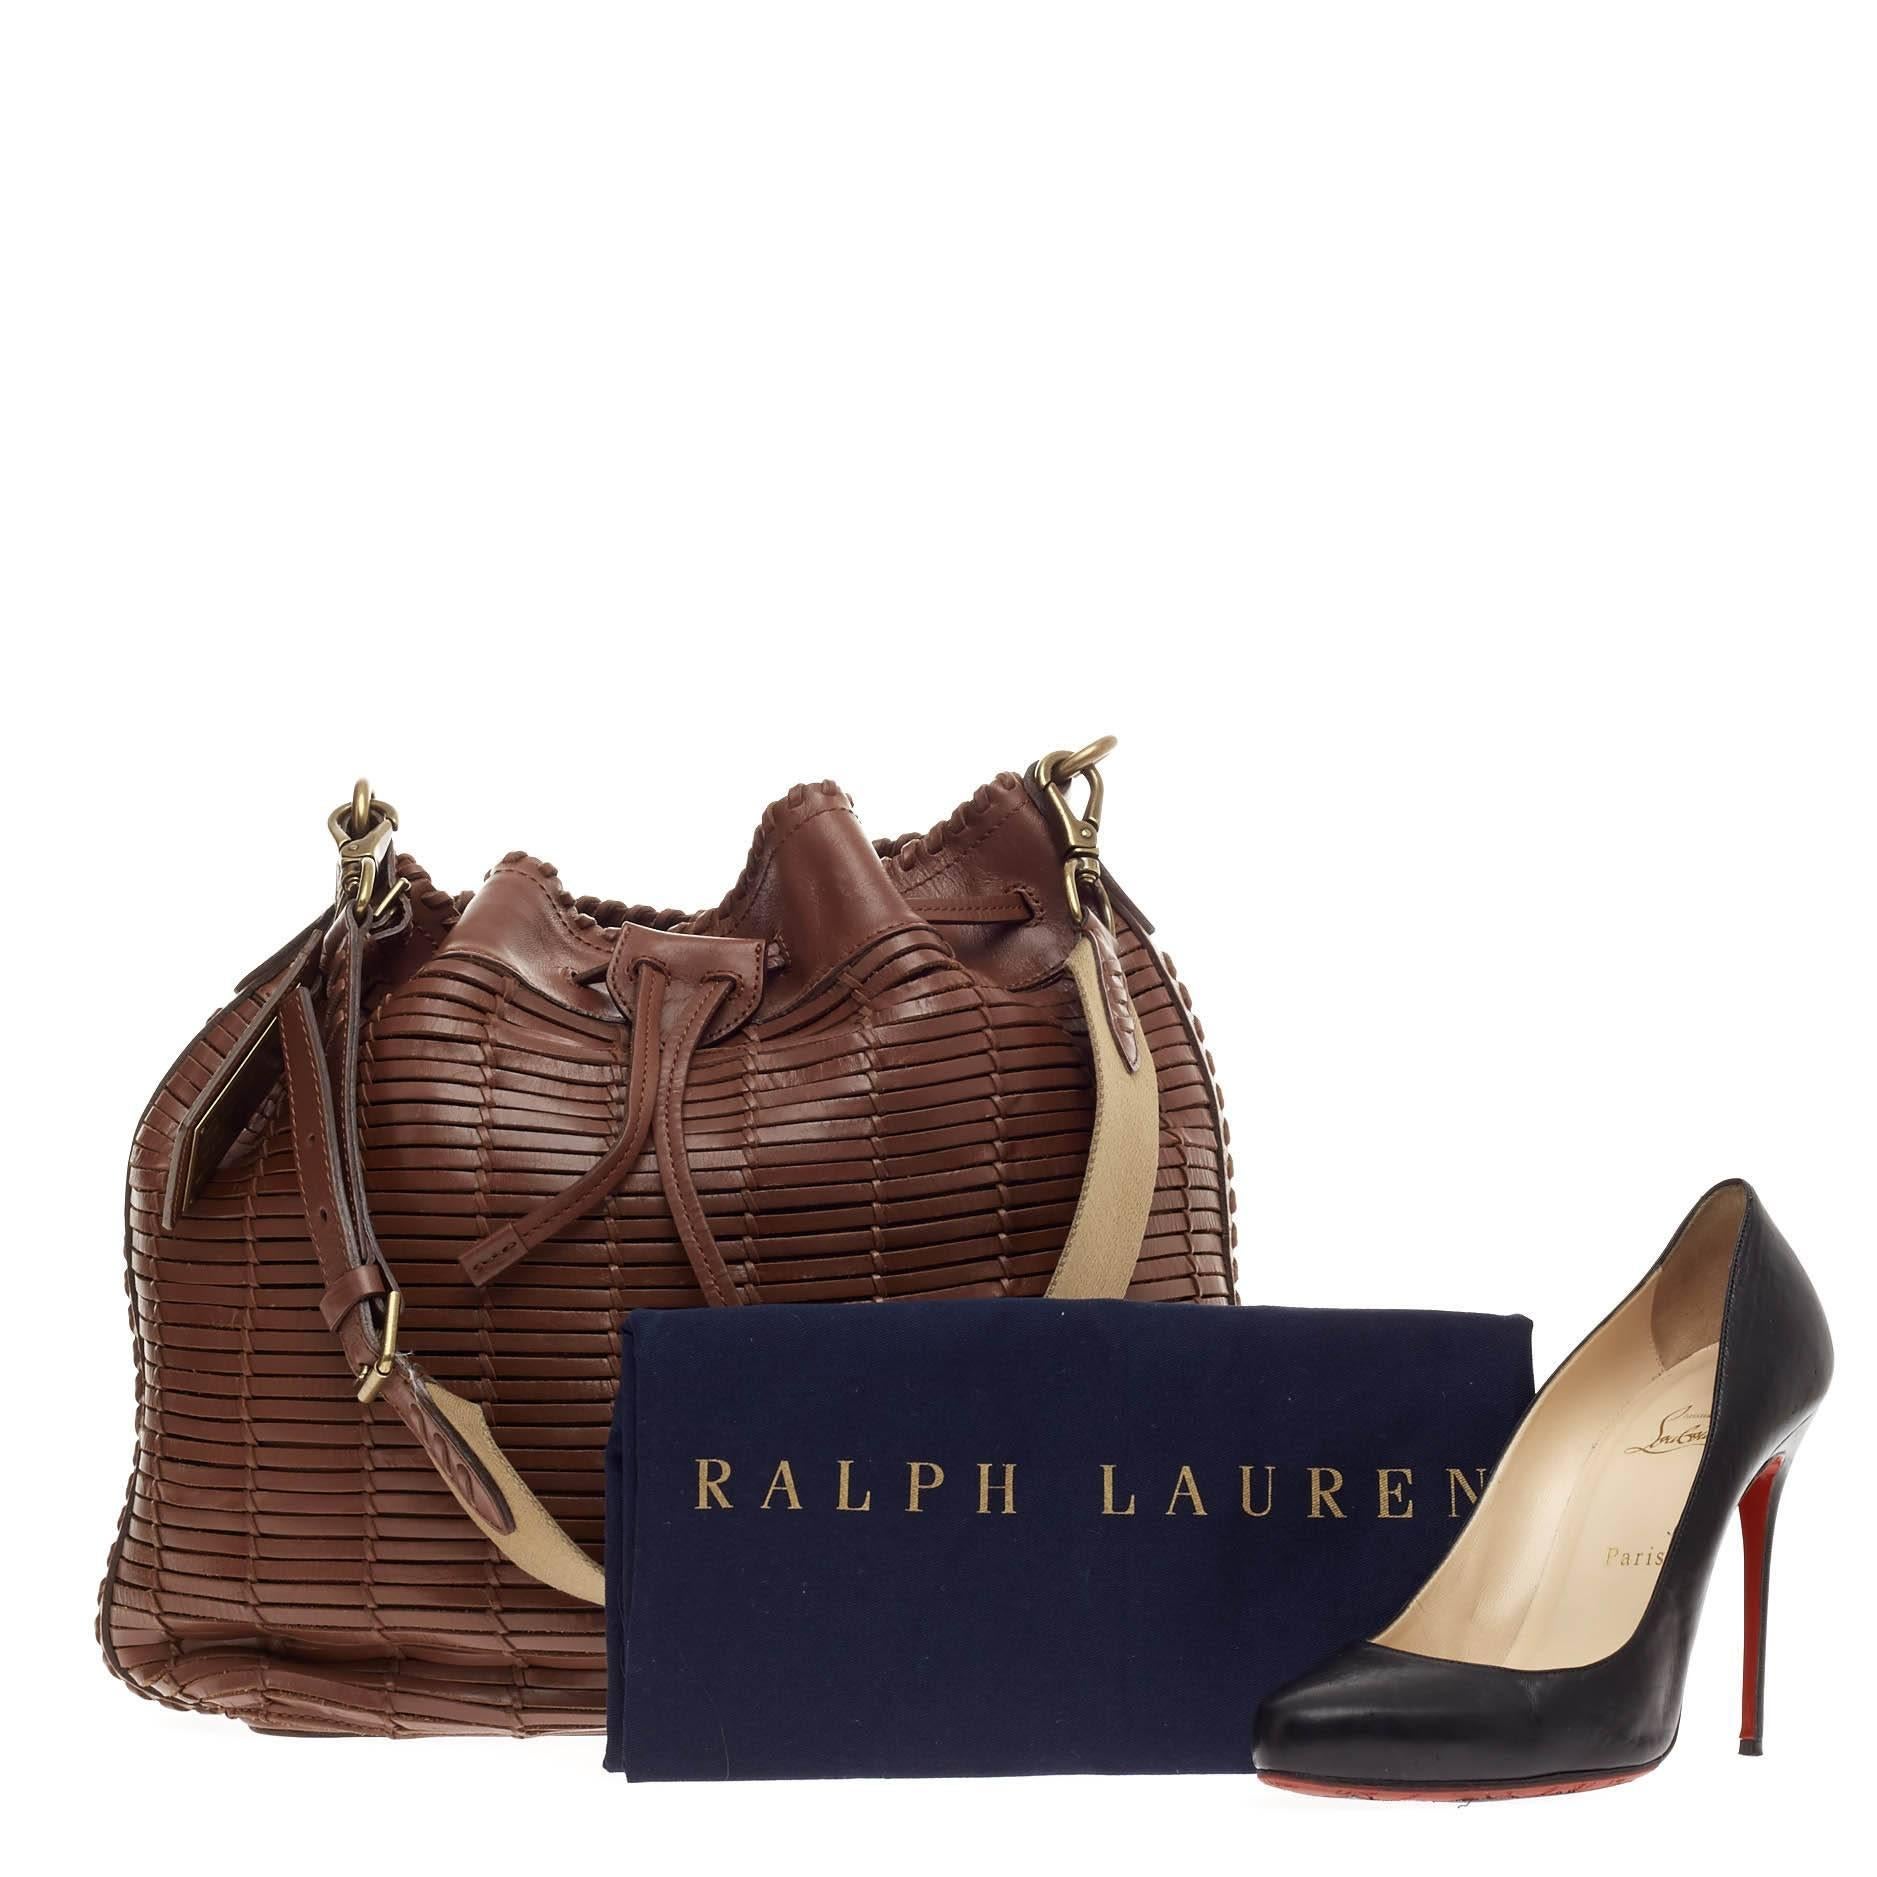 This authentic Ralph Lauren Drawstring Shoulder Bag Pleated Leather Large is a stylish casual everyday bag perfect for fashionistas. Crafted in brown window-style pleated leather, this industrial bucket bag features an adjustable shoulder strap,